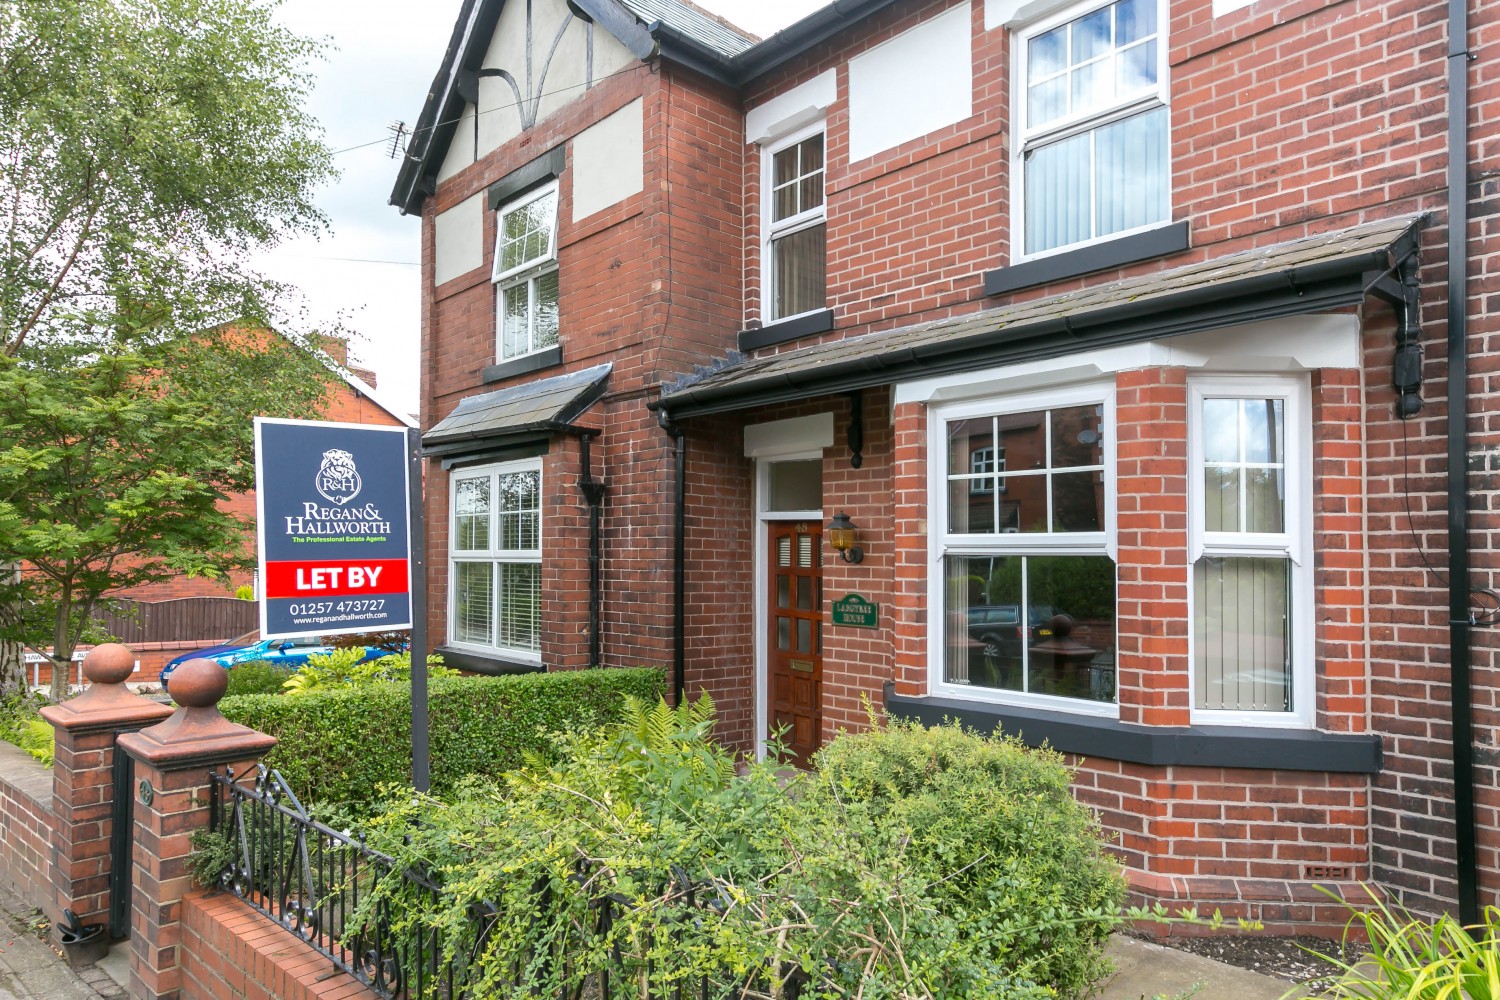  Record lettings month for Regan And Hallworth 